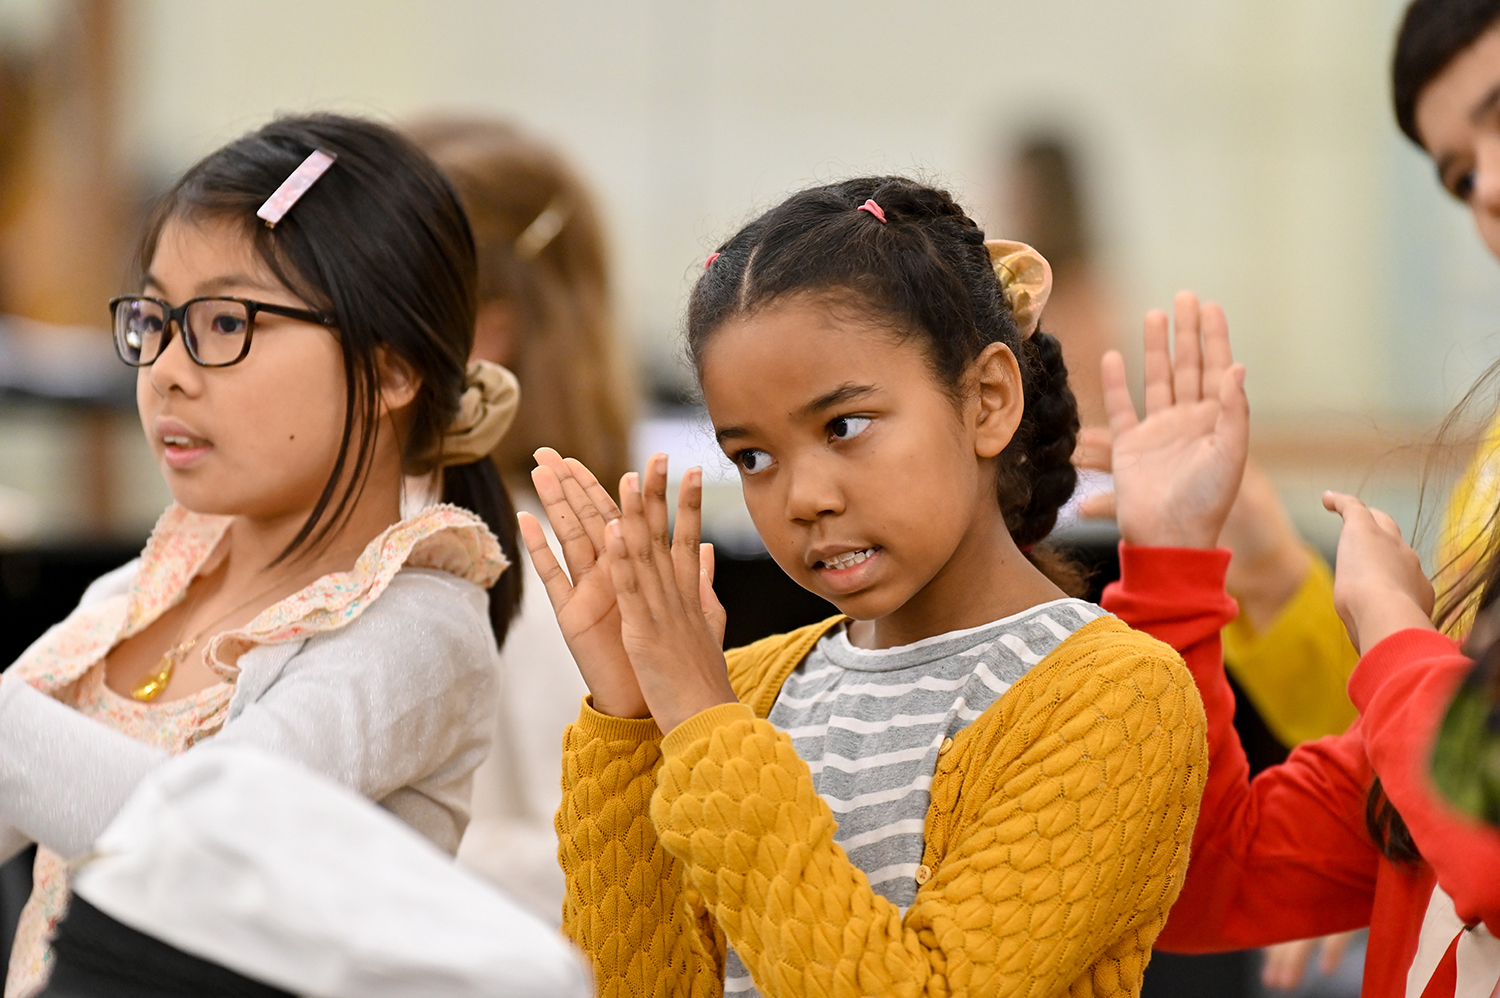 Young children clapping